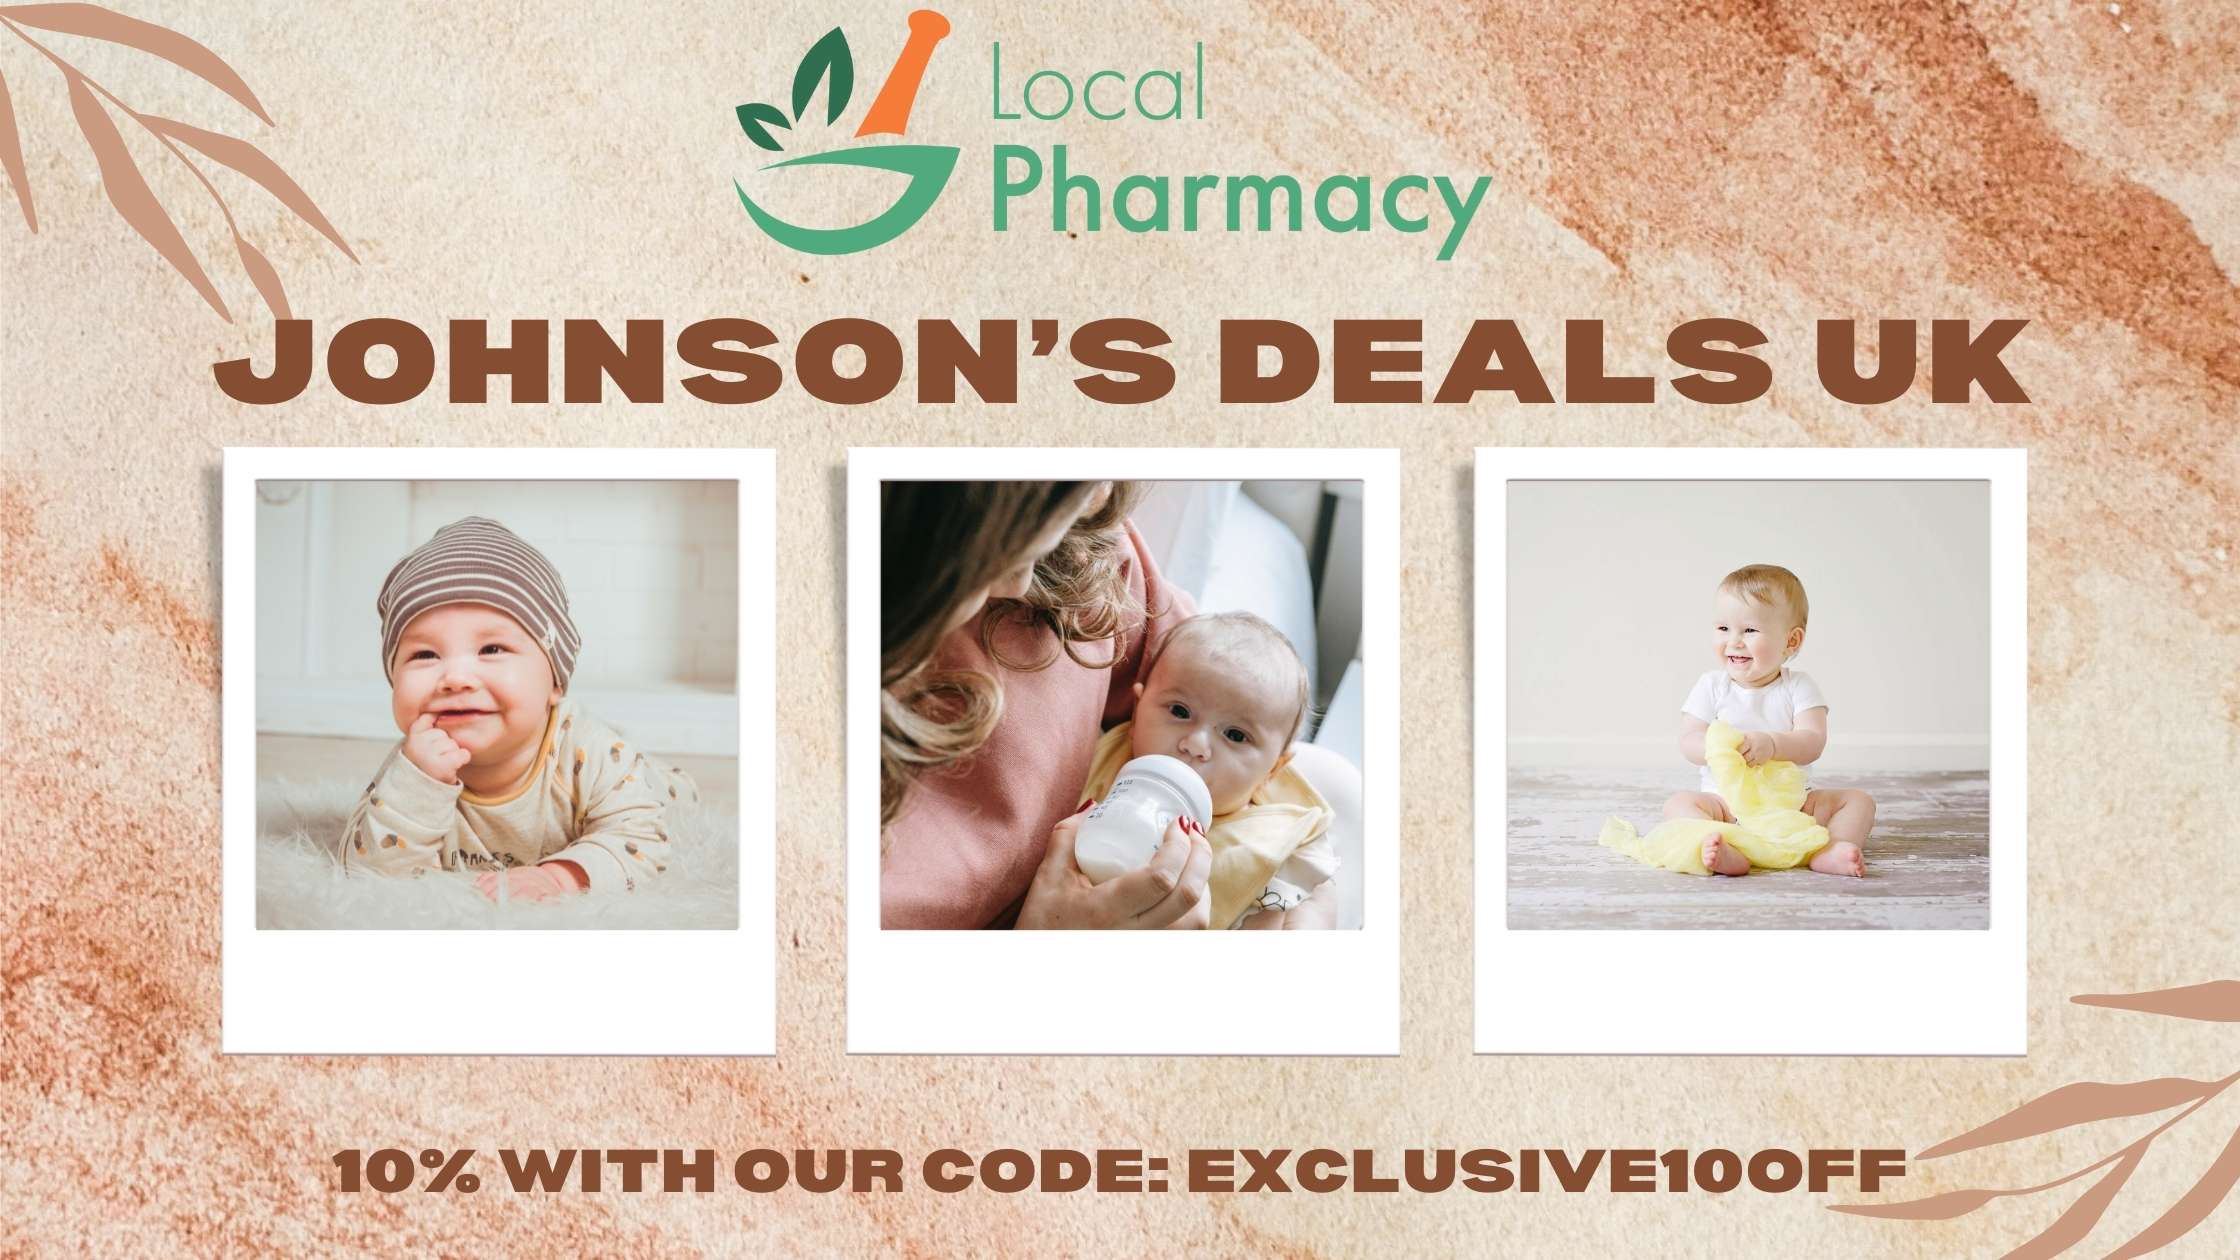 Johnson’s coupon code and deals uk